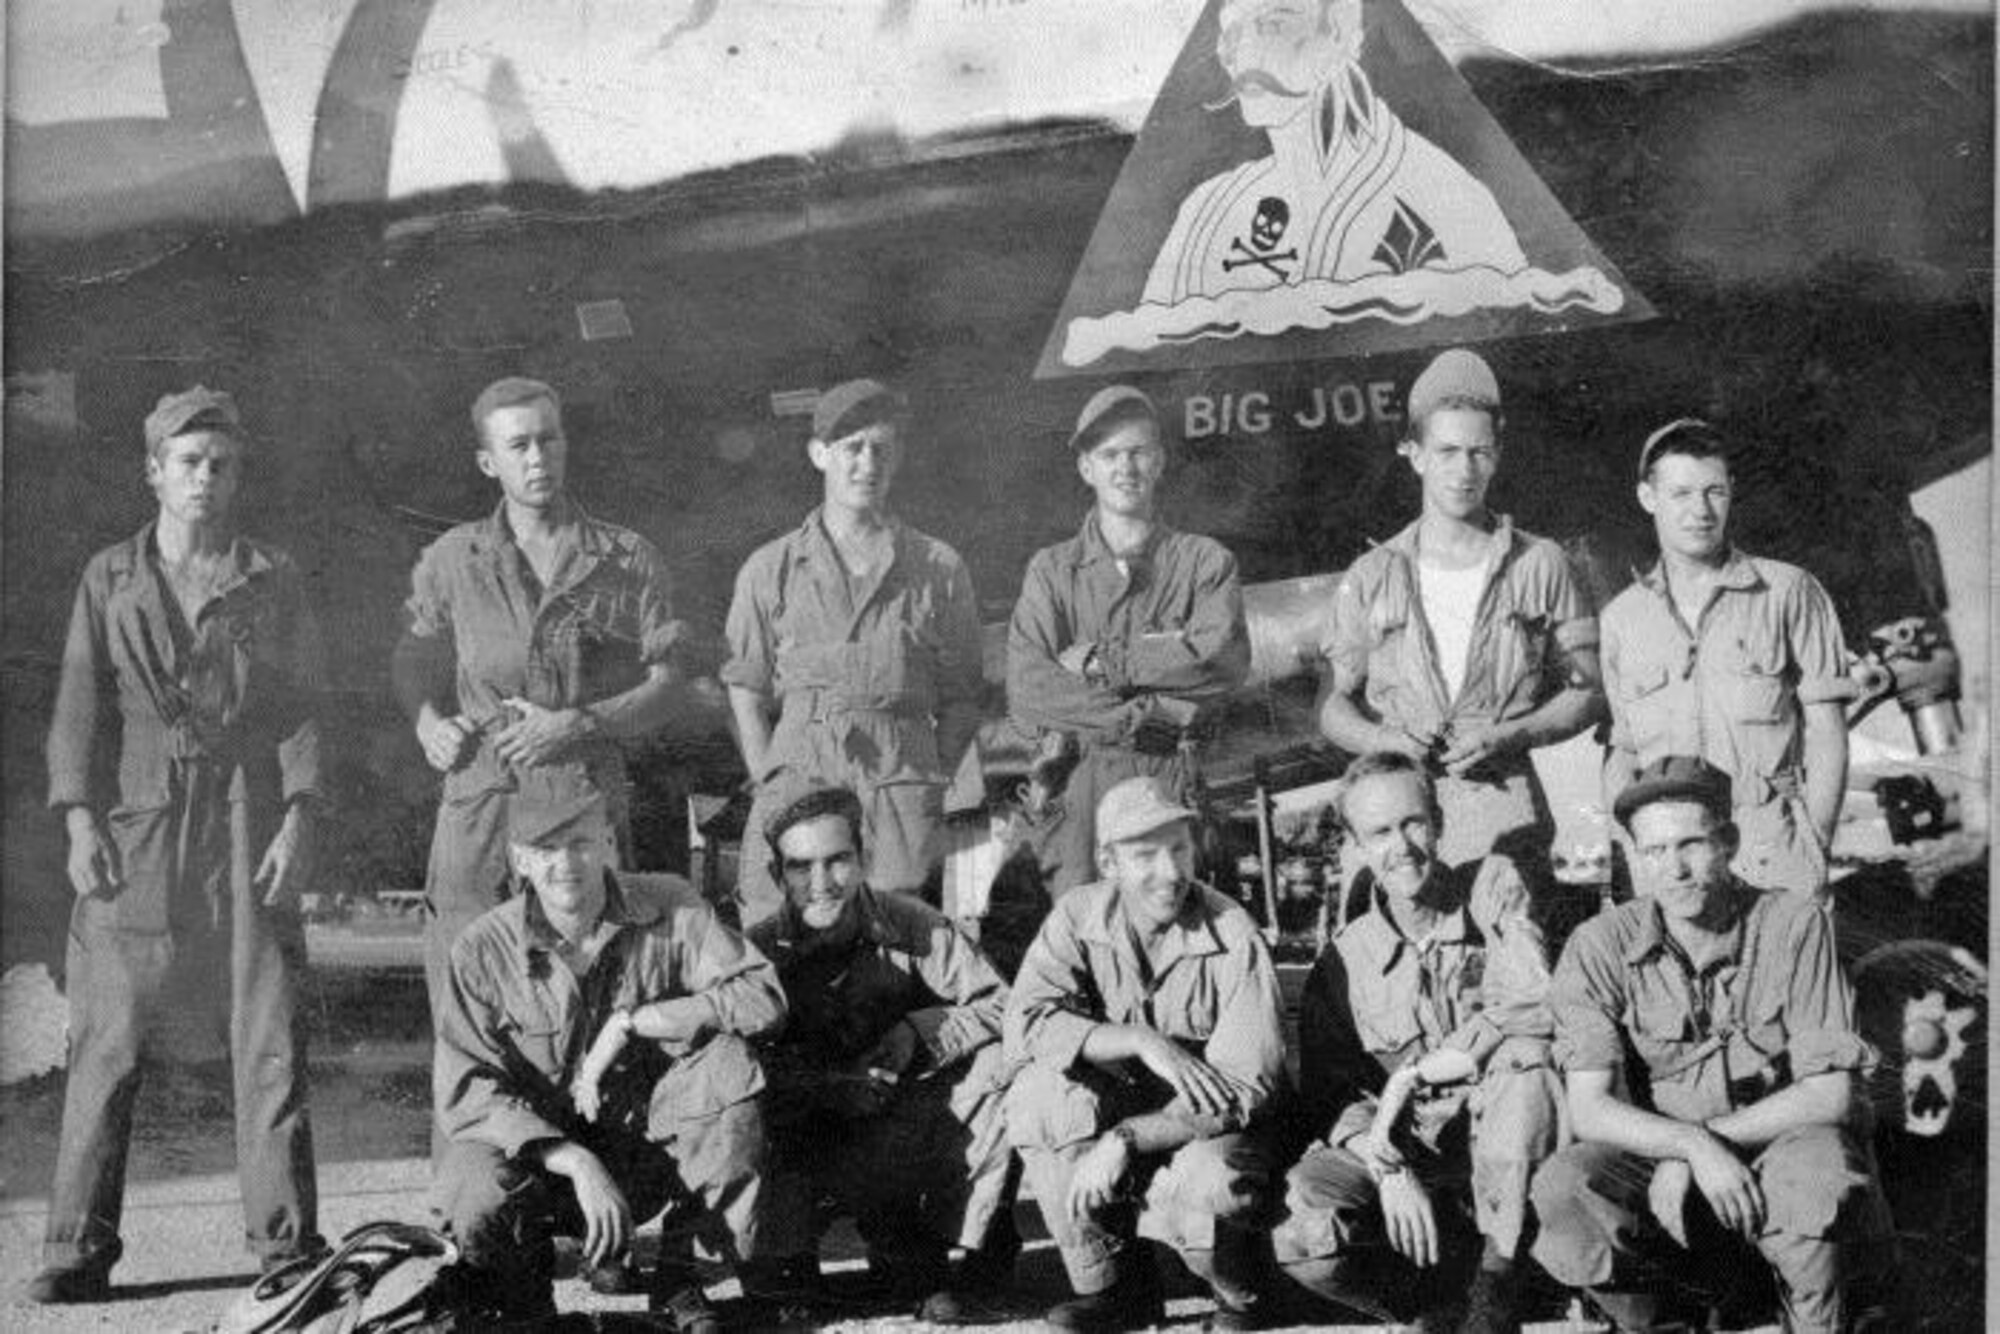 Co-historian David Wilson’s father, Sgt. Bernard E. Wilson, was a left gunner the 24th Bomb Squadron’s in the Howett crew of Crew # 2404.  The crew’s first missions were flown in “Big Joe,” with an experienced Aircraft Commander, pictured with them here, and then later they all flew in “Anonymous IV.”  Standing, from left to right, are Sgt. Bernard E. Wilson (Left Gunner), Cpl. Jack B. Denny (Right Gunner), Cpl. Marion L. Long (Tail Gunner), Sgt. Malcolm W. Douglas (Flight Engineer), S/Sgt. Raymond E. Raetz (Central Fire Control Gunner), Sgt. James C. Bishop (Radio Operator).  
Kneeling, from left to right are 2nd Lt. Phillip R. Pilling (Radar Operator), 2nd Lt. Charles E. Pickett (Bombardier), 1st Lt. Claude A. Johnstone (Aircraft Commander of “Big Joe”), 1st Lt. John C. Howett (Pilot), 2nd Lt. James H. Aiman (Navigator).  (Courtesy Mr. David Wilson, via 6th Bomb Group Association)
